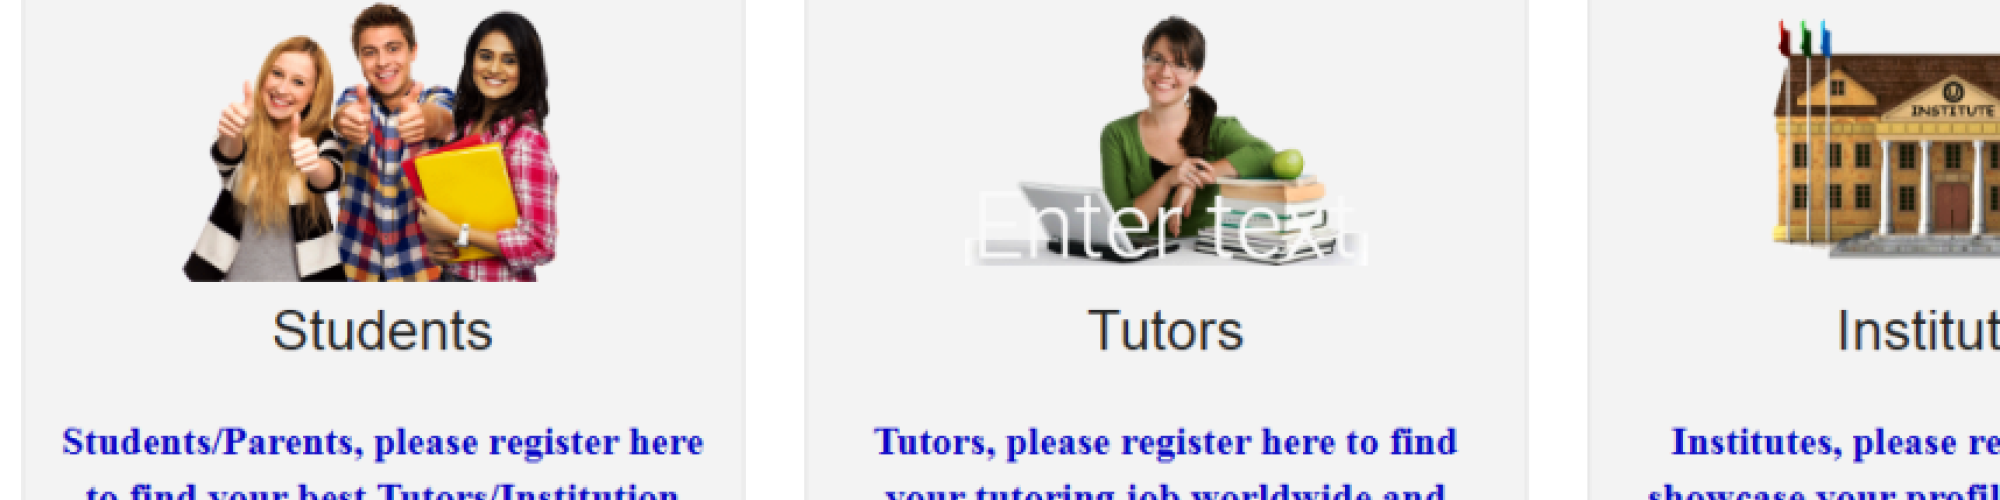 Welcome Tutor - Connects Tutors-Students Globally